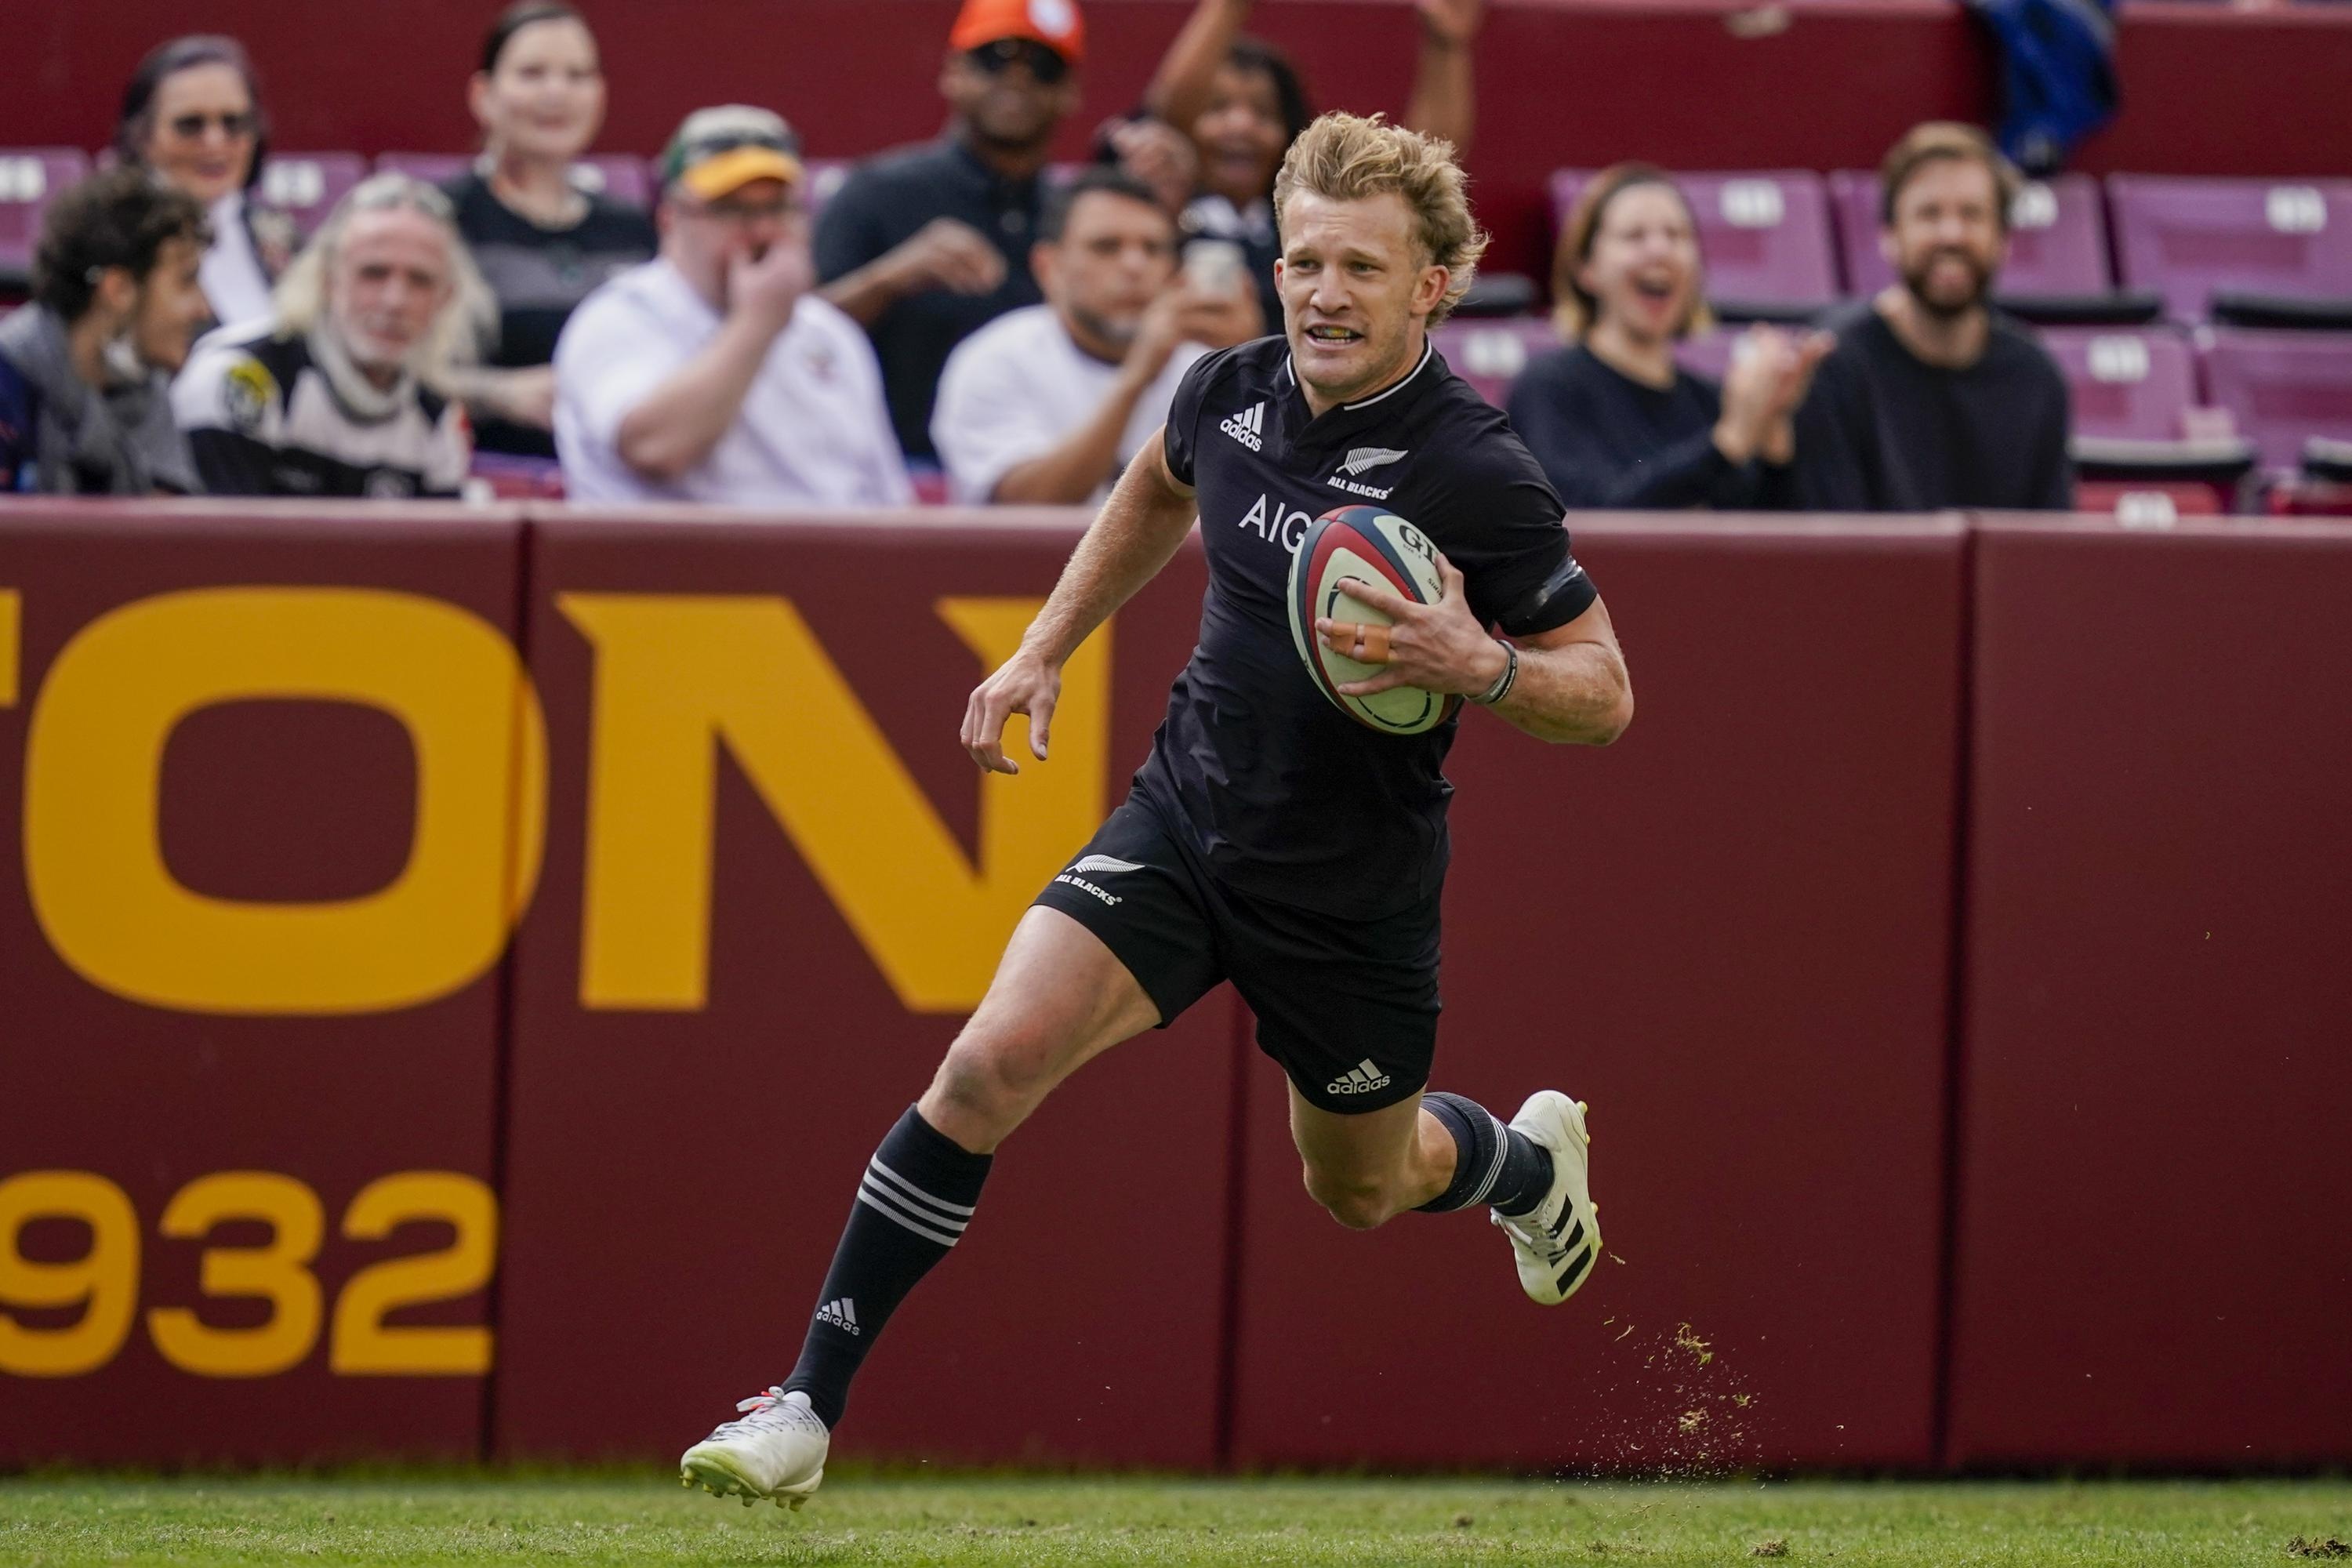 Rugby League: New Zealand's Damian McKenzie runs in to score a try during the match between the All Blacks and the USA Eagles. 3000x2000 HD Background.